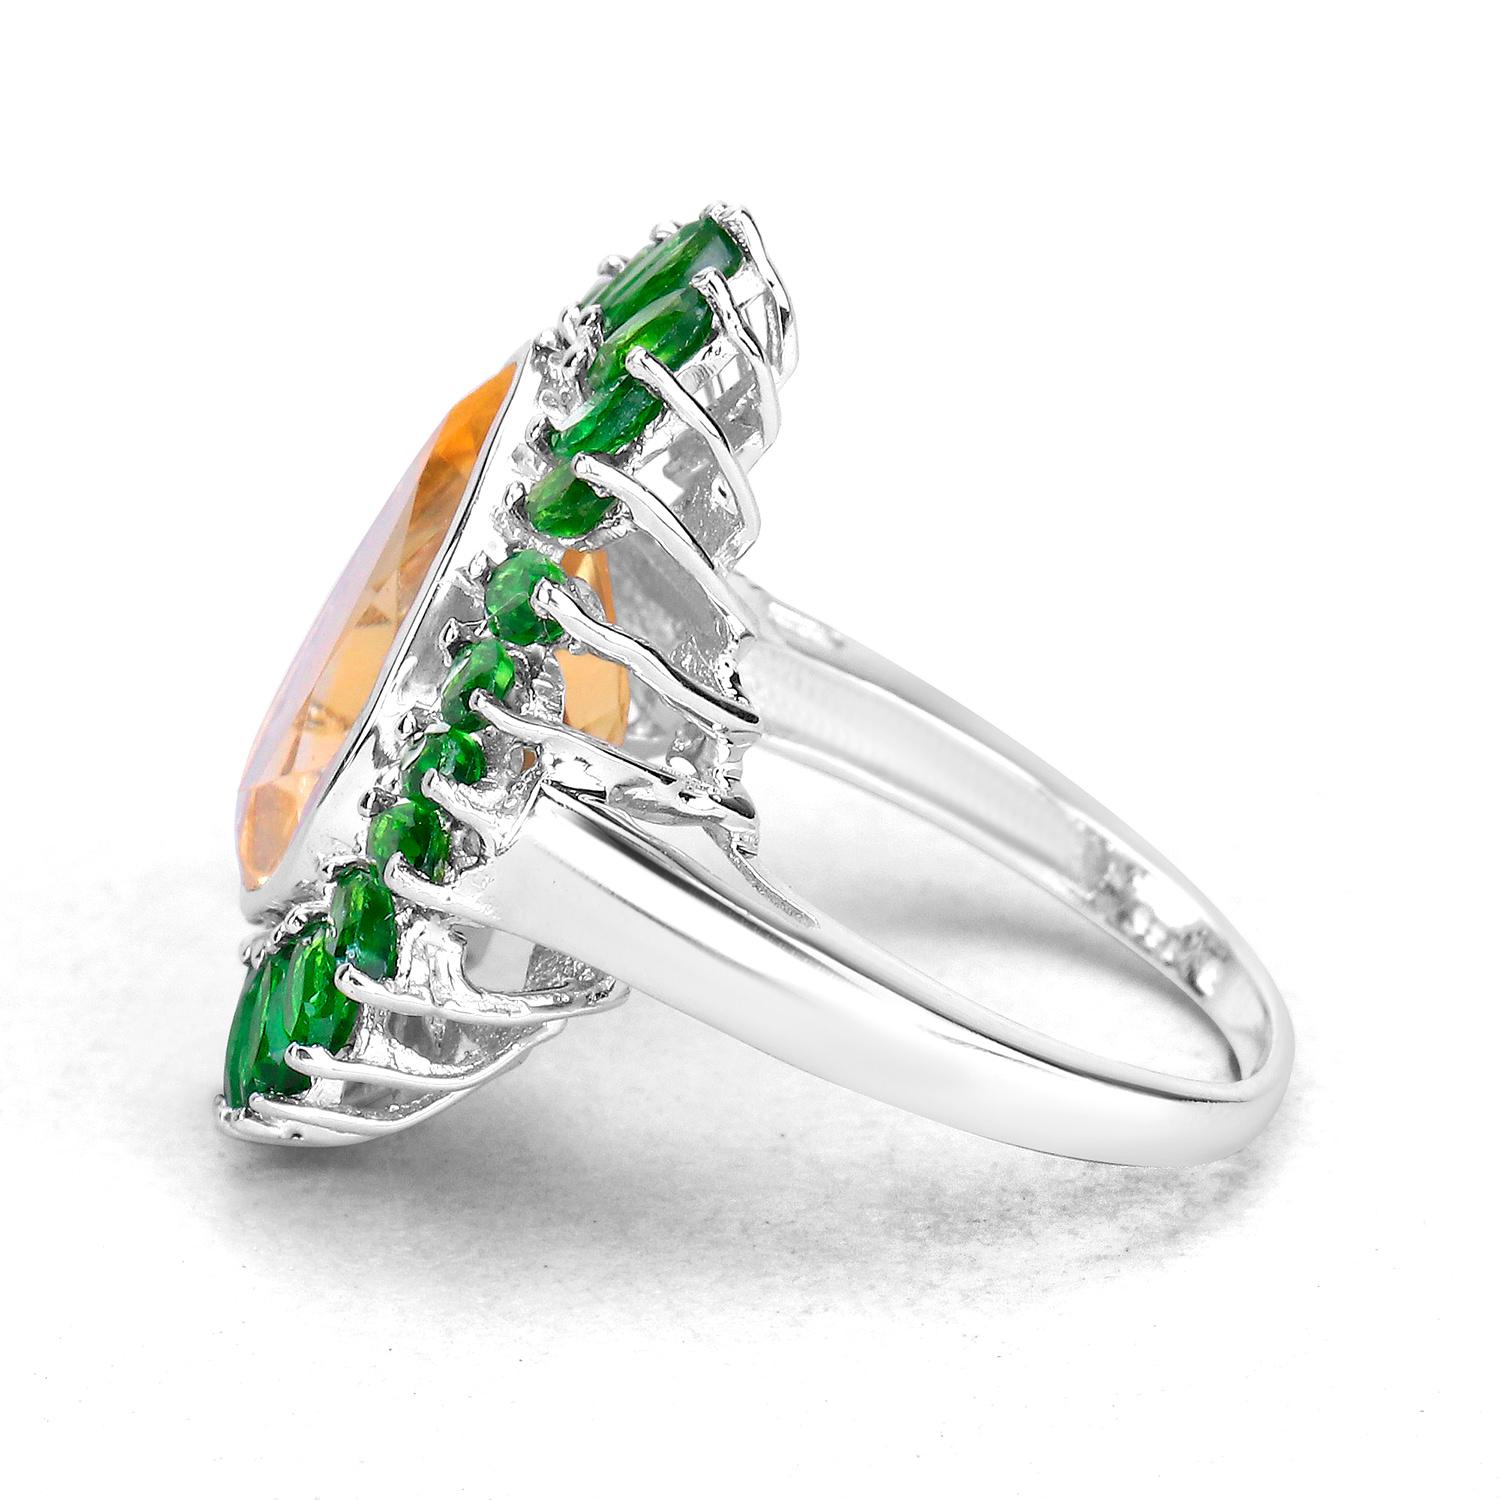 Citrine Cocktail Ring Chrome Diopside Halo 7.05 Carats Sterling Silver In Excellent Condition For Sale In Laguna Niguel, CA